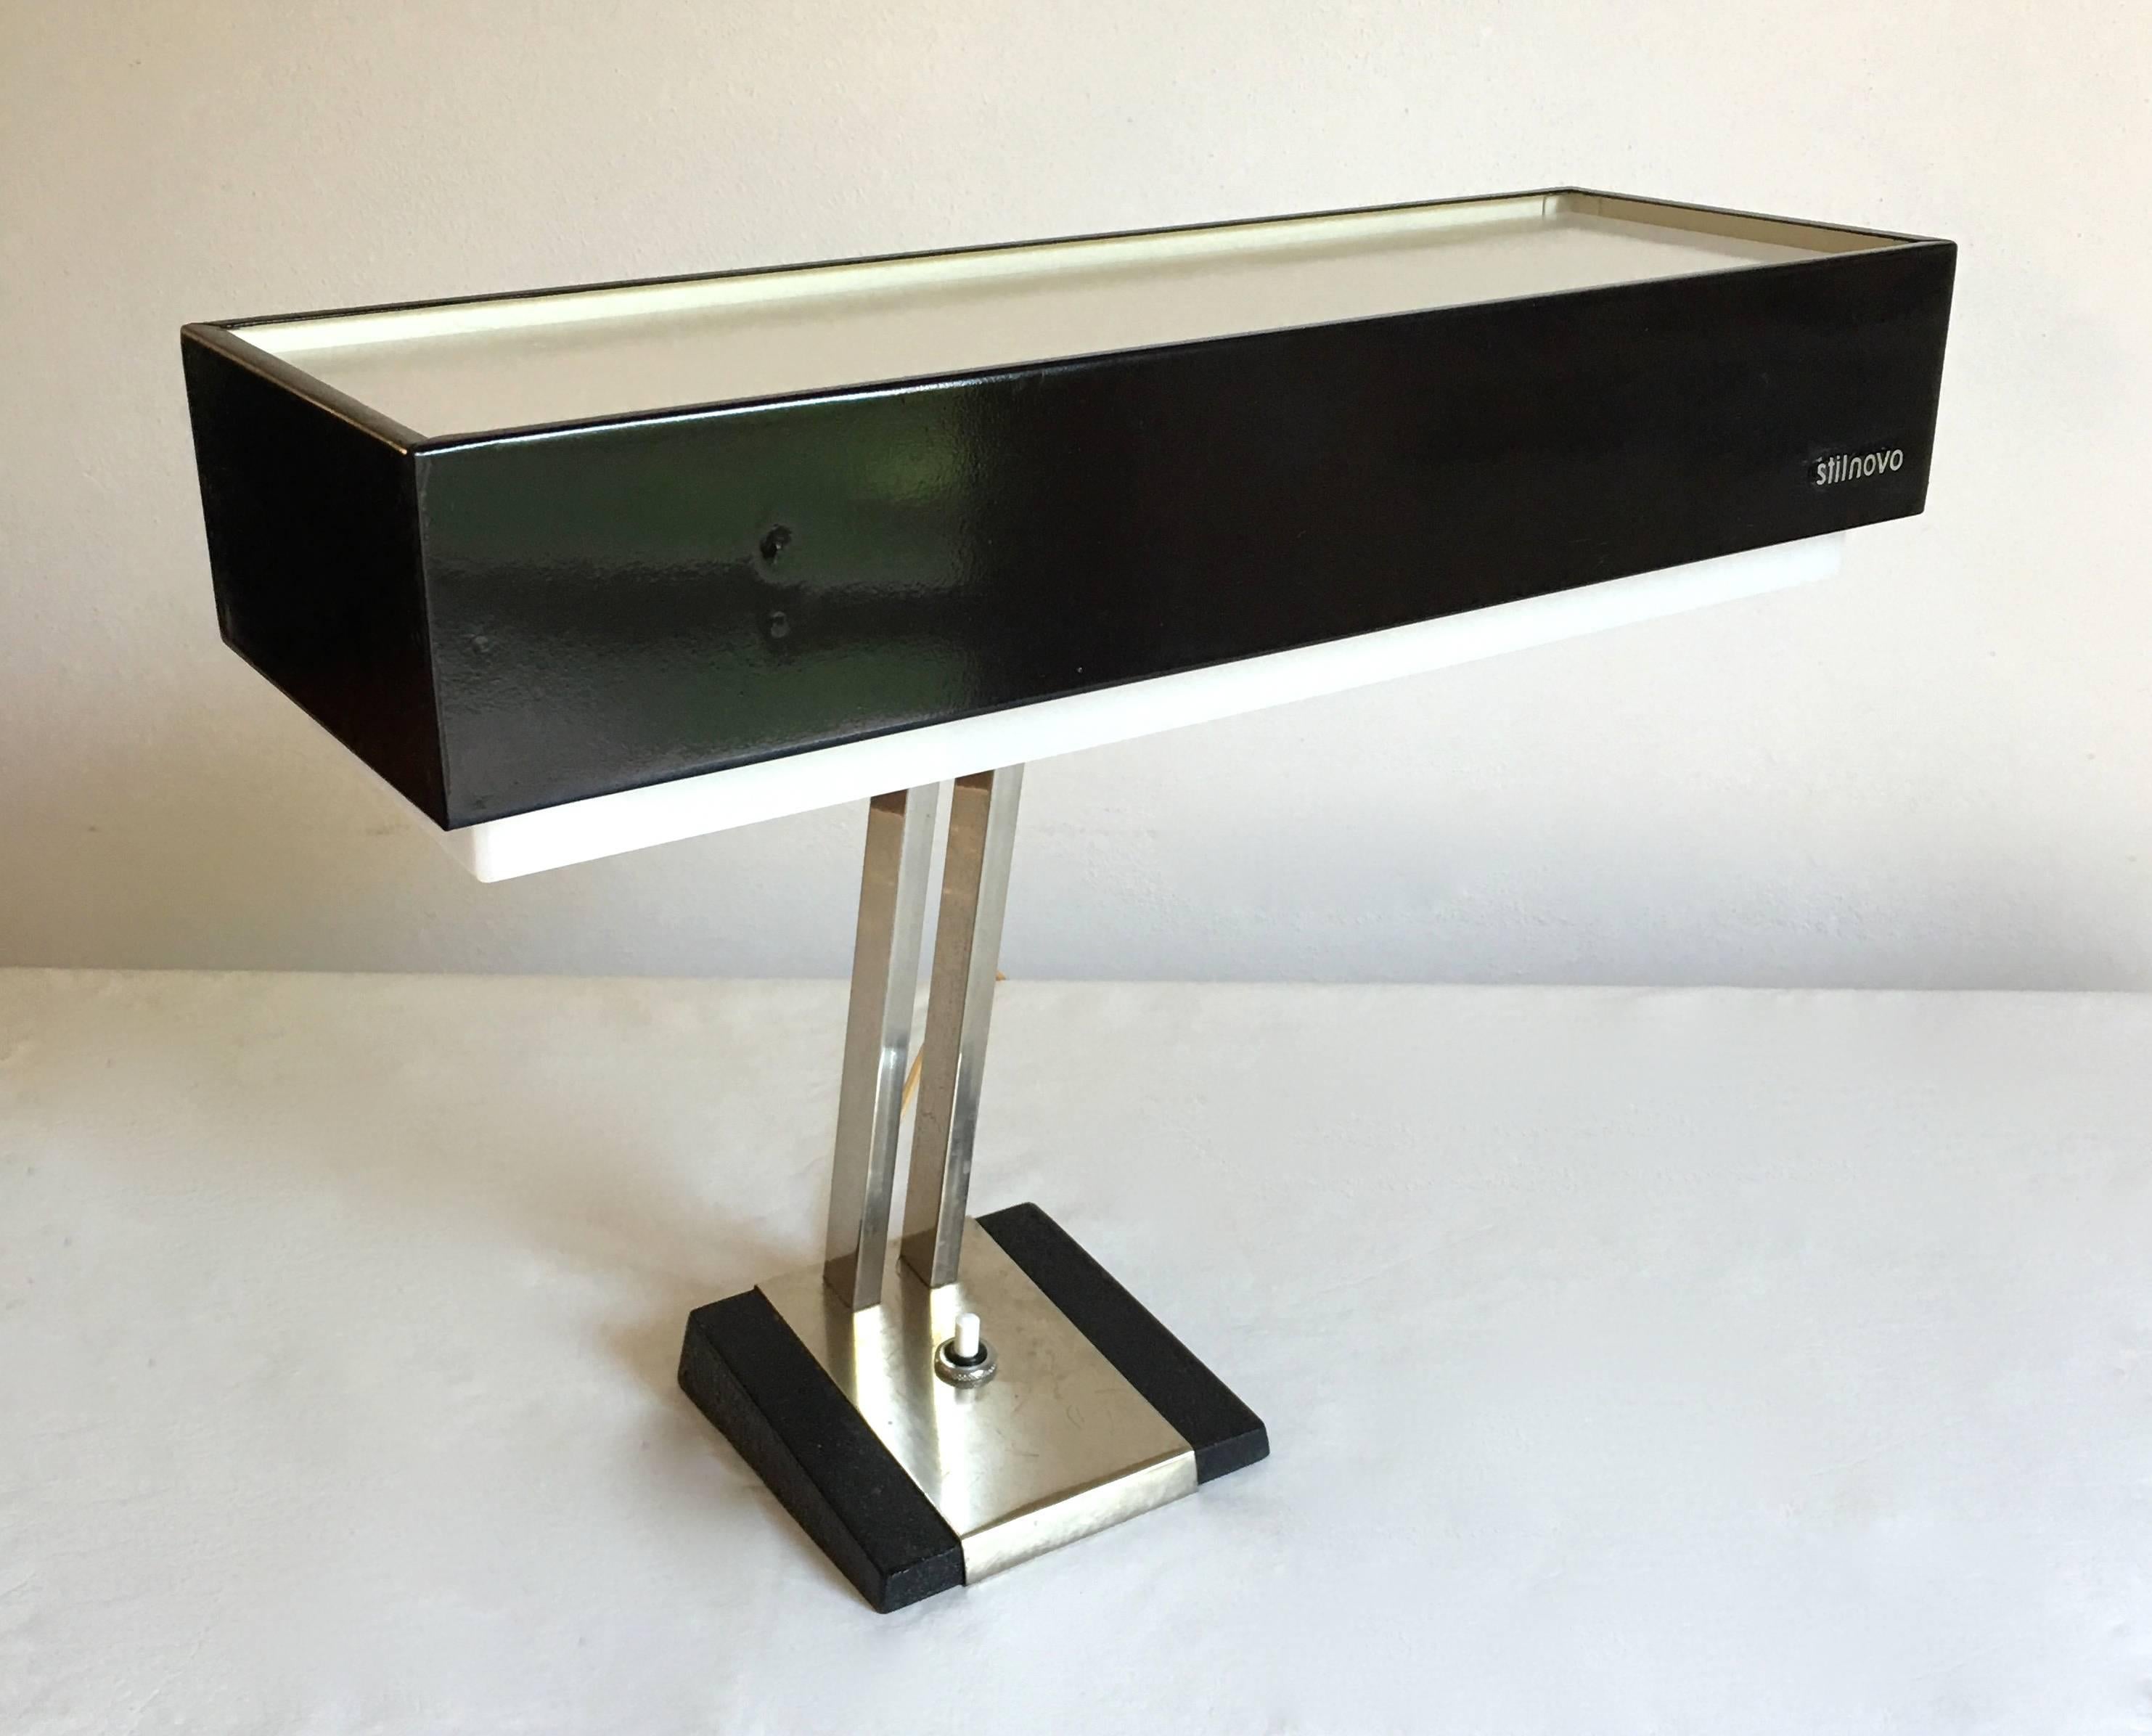 Industrial style masculine desk lamp by Stilnovo manufactured in the 1960s.

Black metal shade with perspex diffuser and set on a chromed double-arm and base.

Very soft light.

It has its switch on the base.

Marked “Stilnovo” on the front